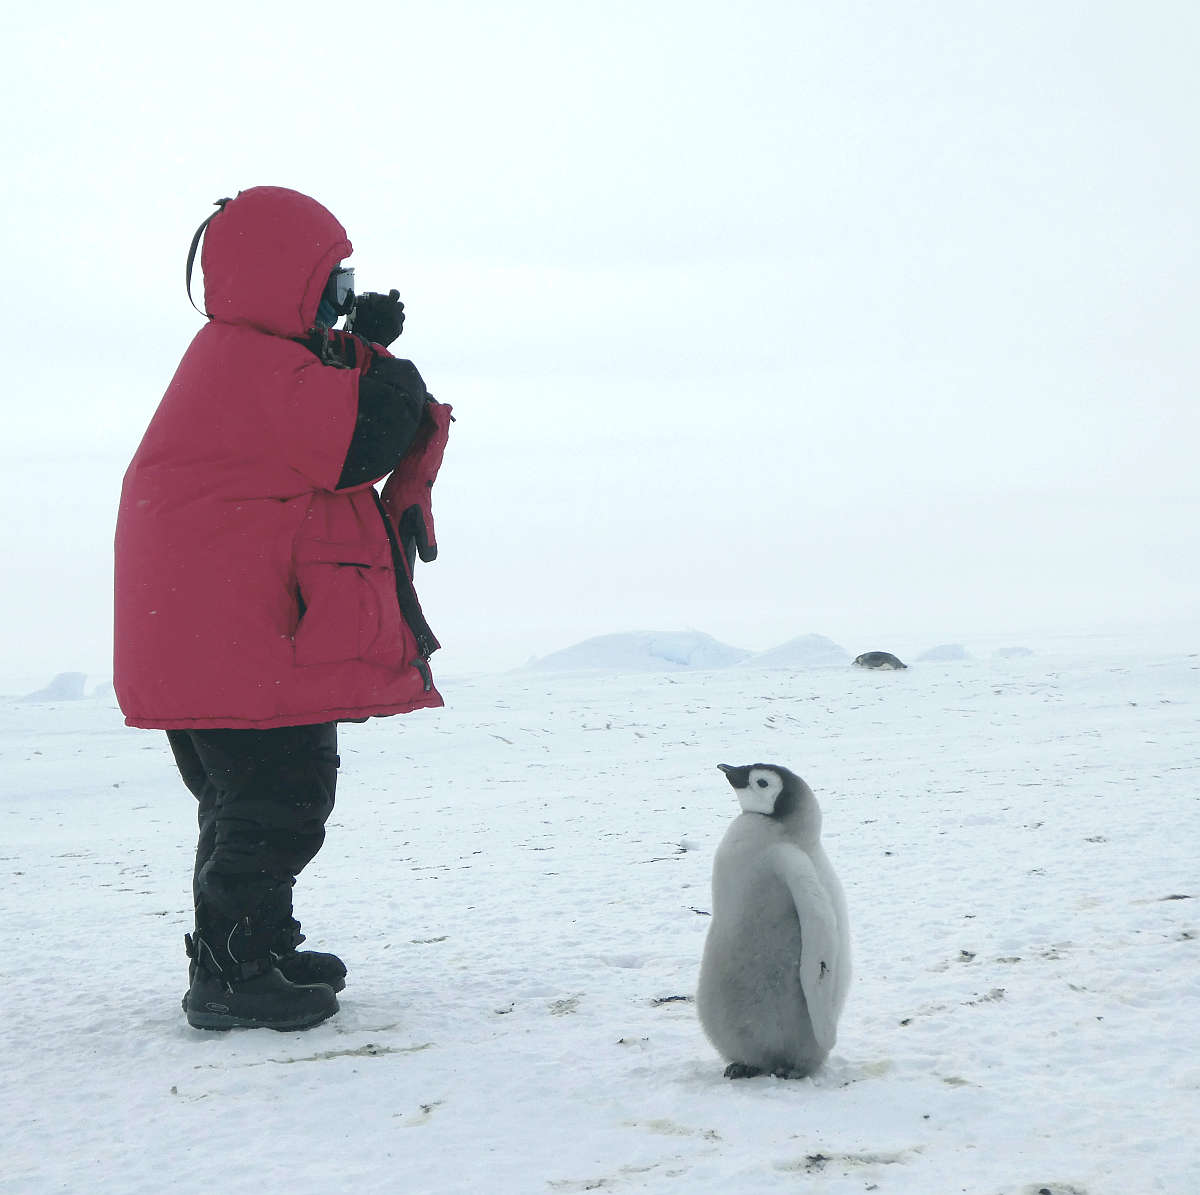 Emperor penguin chick looking inquisitively couple feet from Antarctic visitor